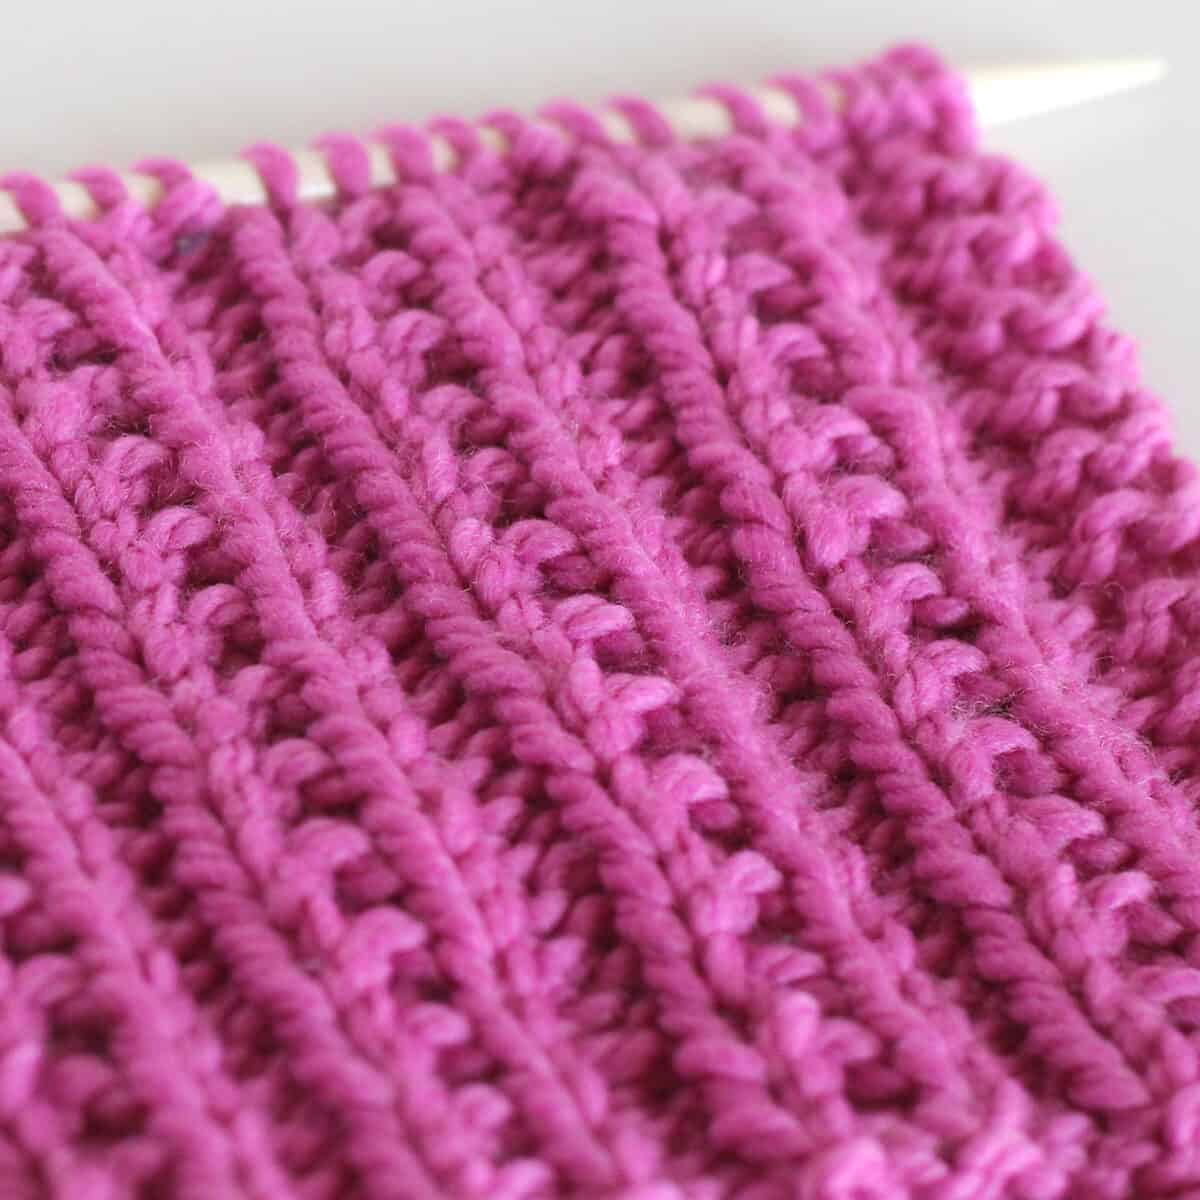 Side texture view of Beaded Rib Knit Stitch Pattern in pink color yarn on knitting needle.